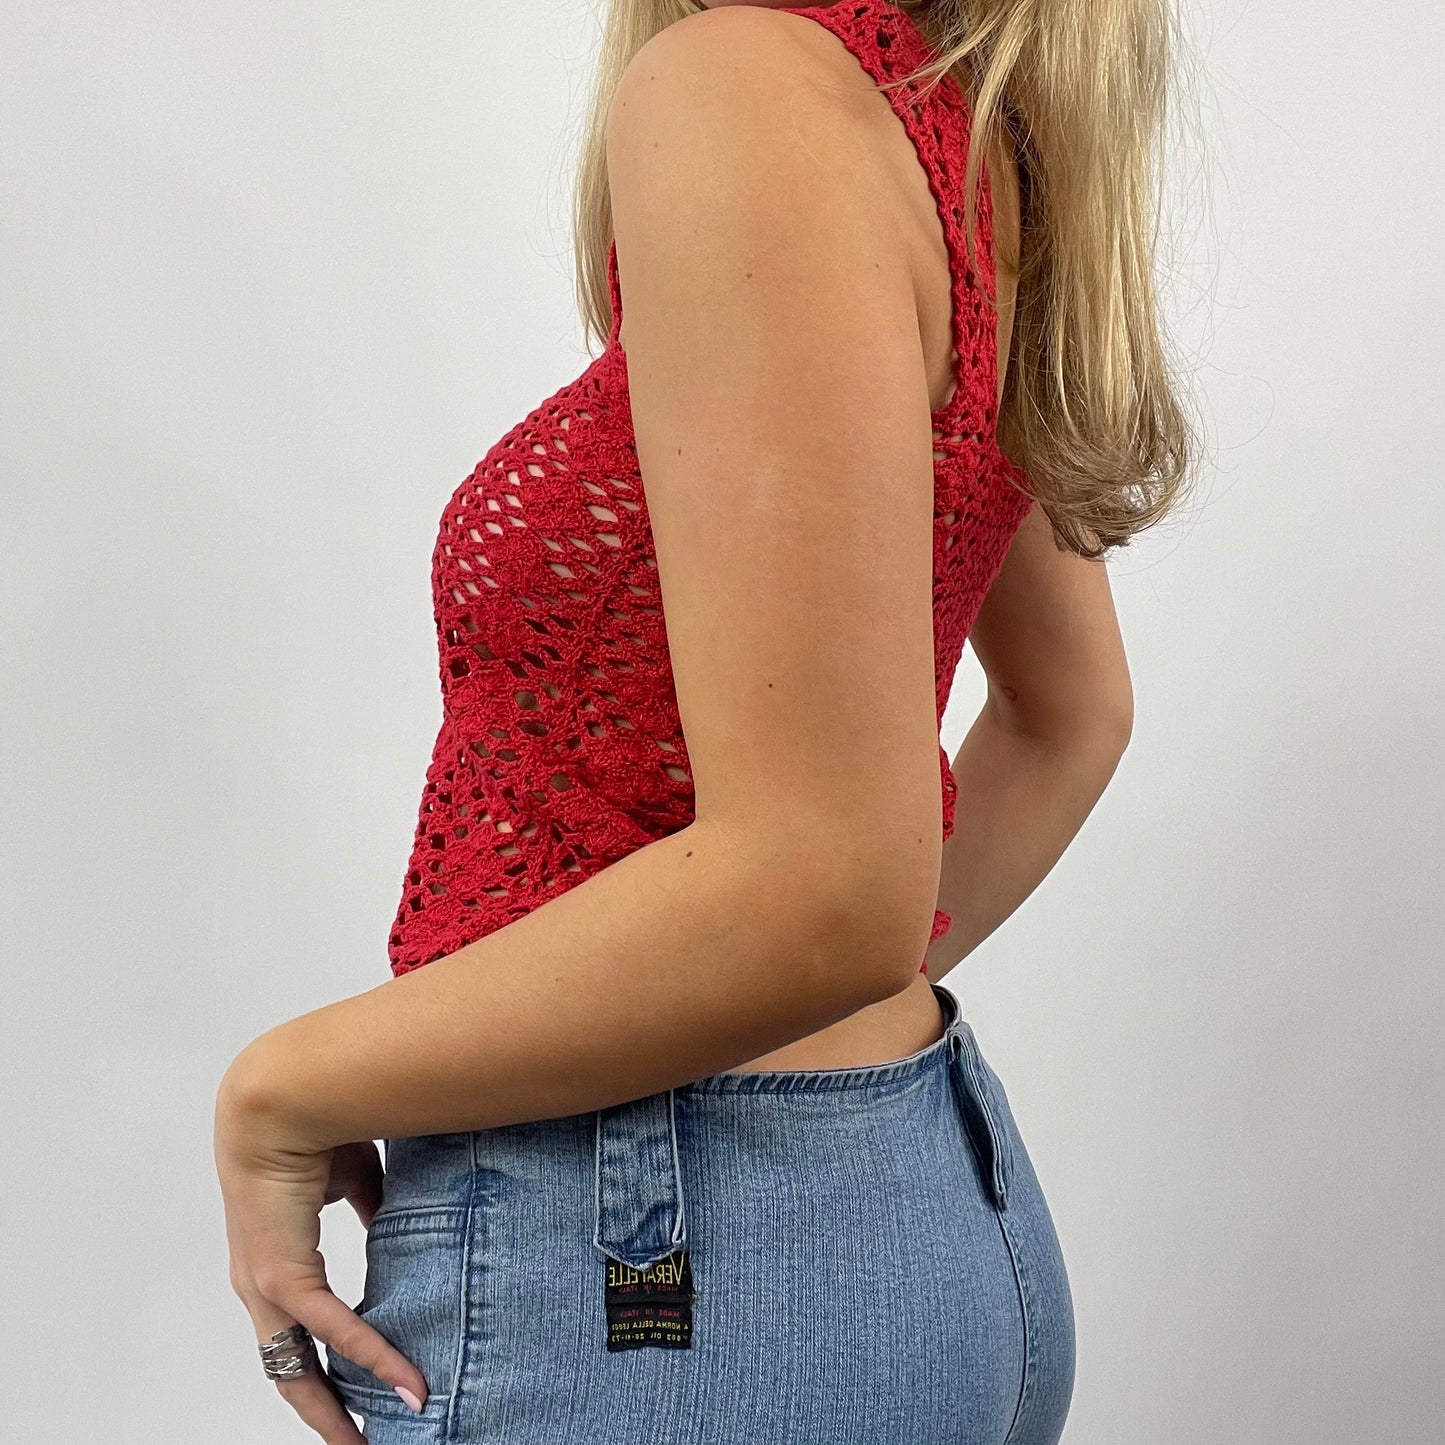 GALENTINES DAY DROP | small red crochet top